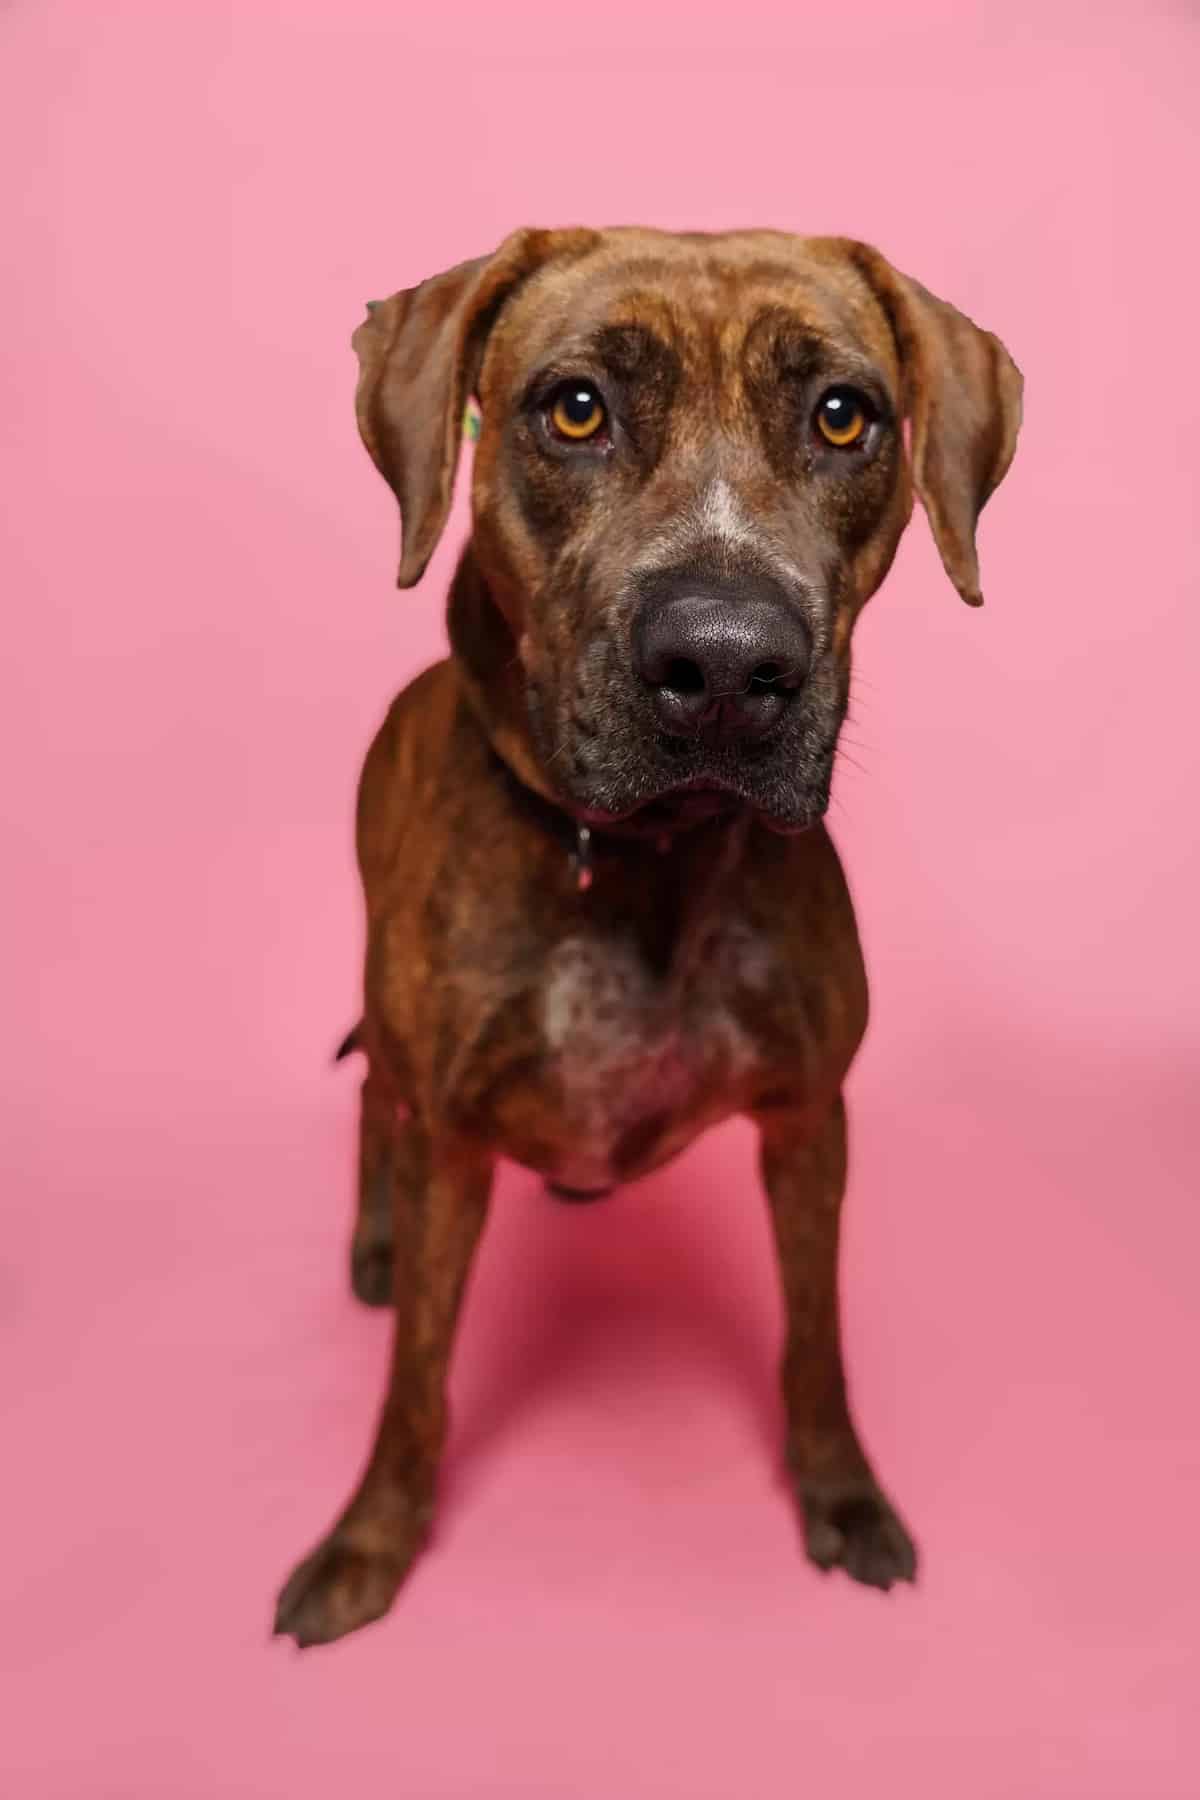 Shelter Dogs Dressed in Valentine's Day Photo Shoot